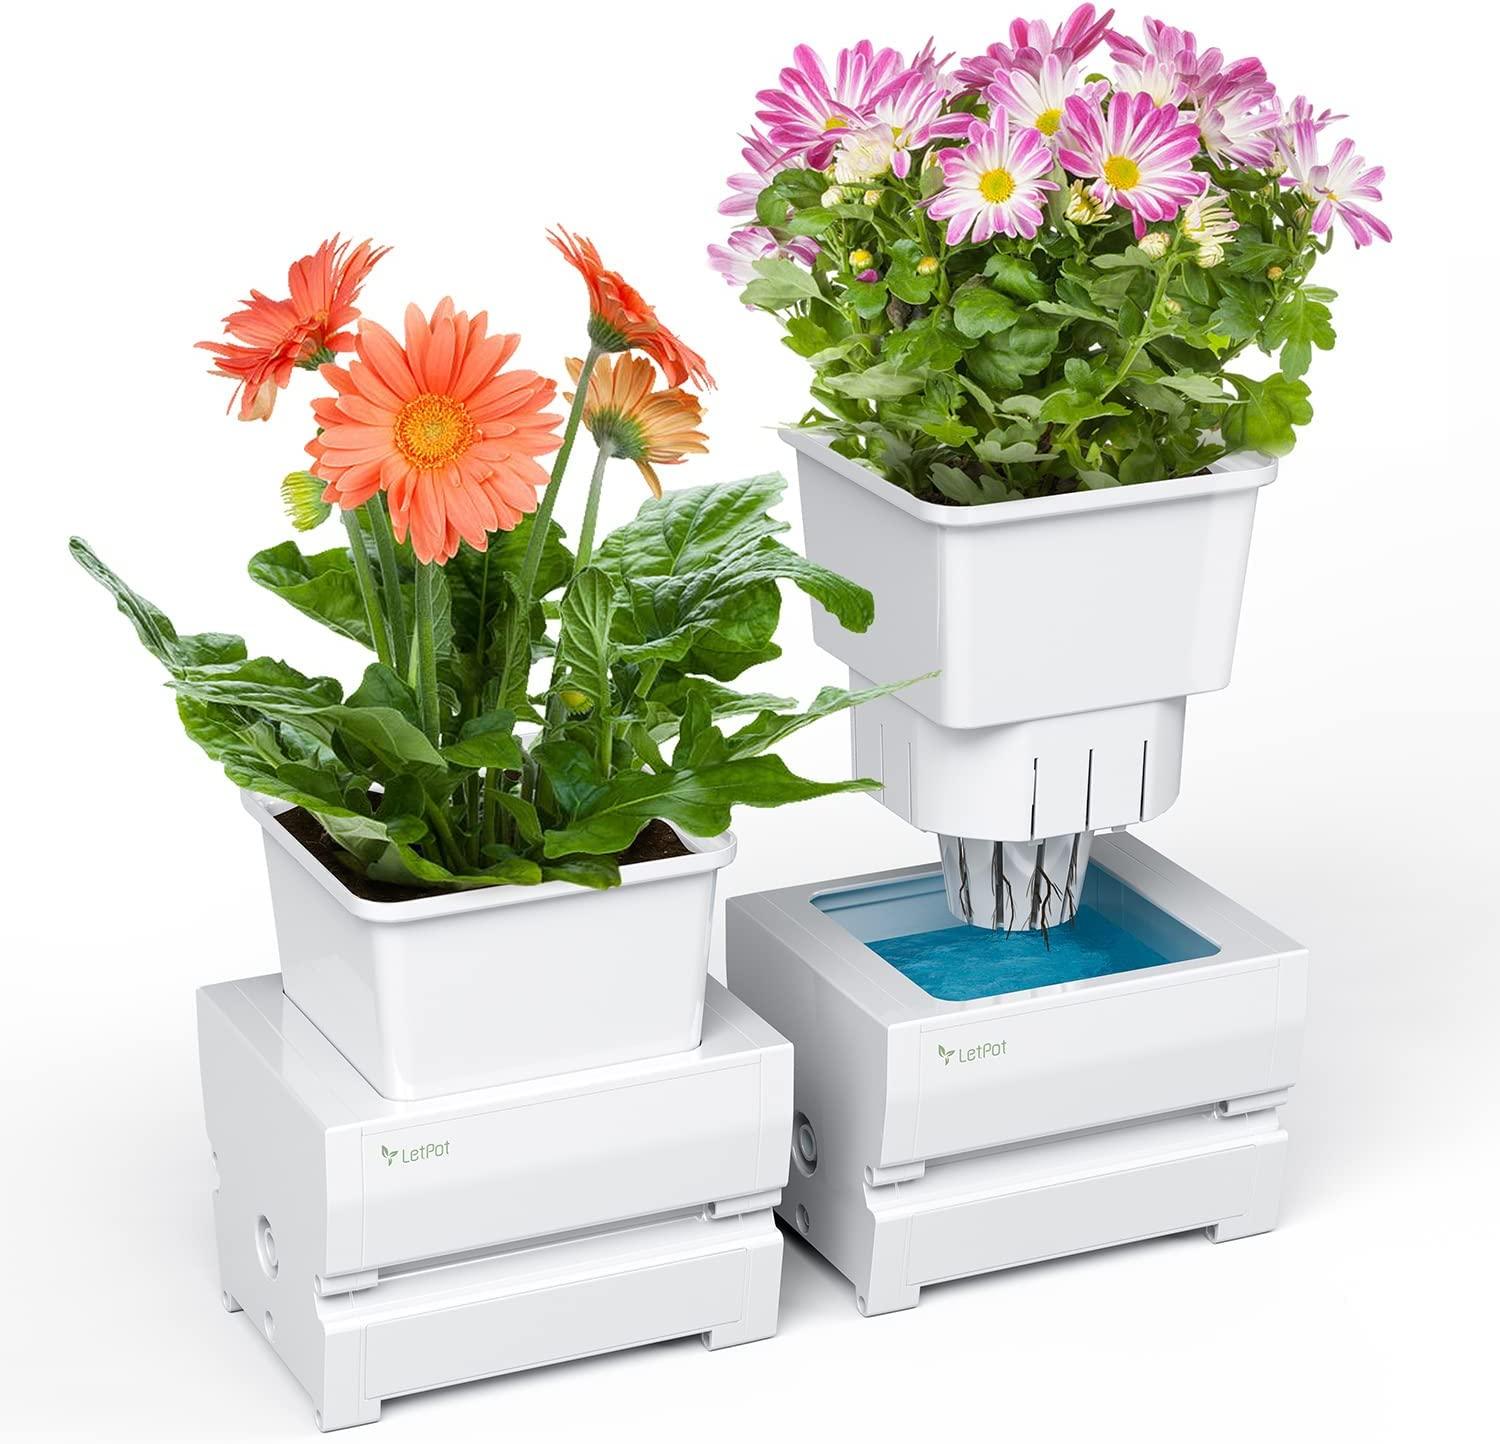 Self-watering Planter with 21 Days Watering-free 2 Separate Plant Pots - LetPot's garden